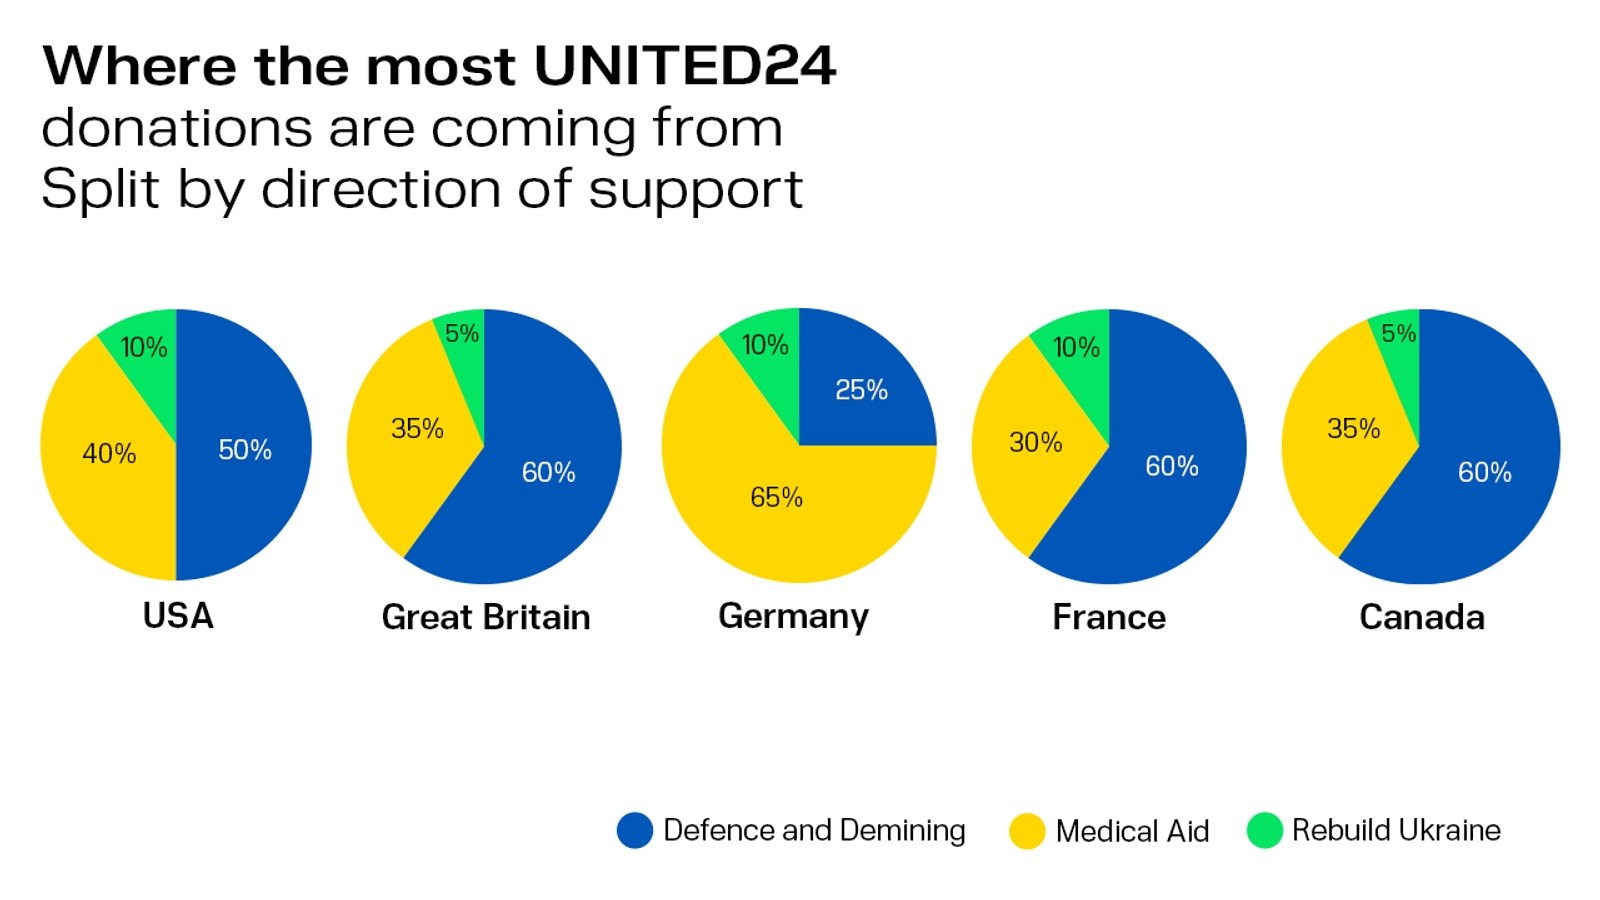 Most Popular Directions of Support Among UNITED24's Most Active Donors